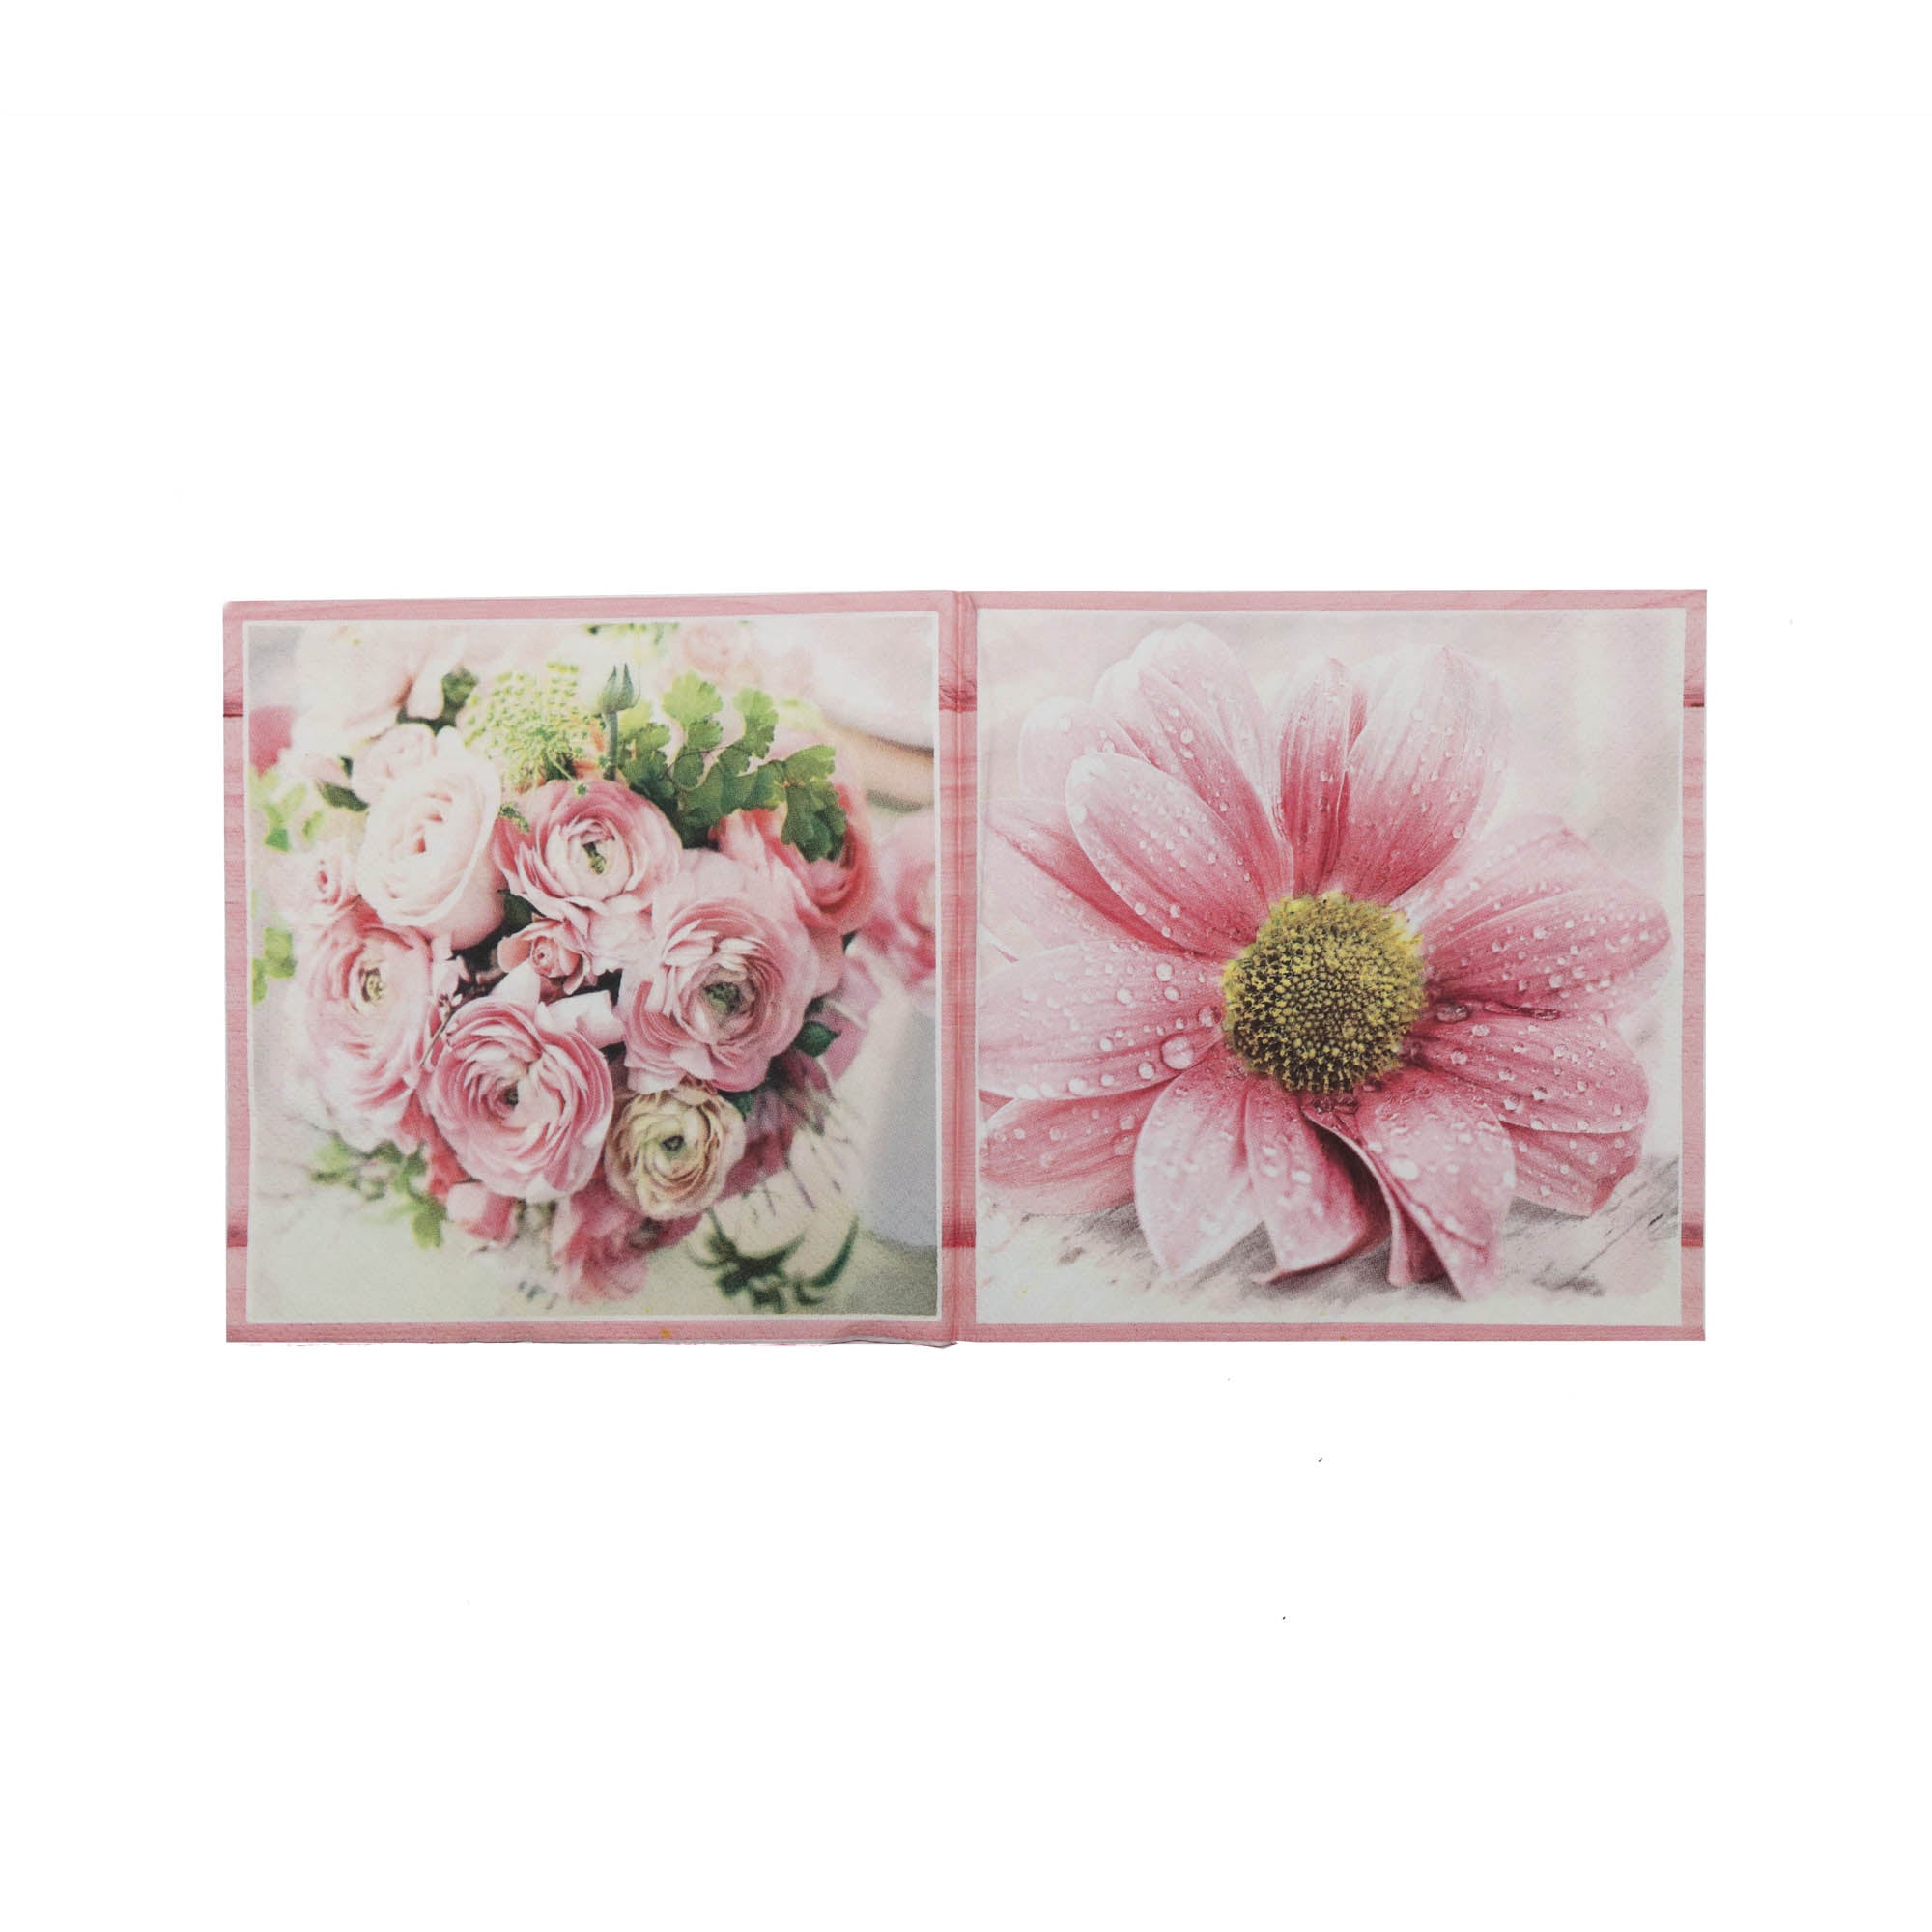 Luncheon Table Paper Serviettes 3ply 33x33cm Pink Flower 20Pack